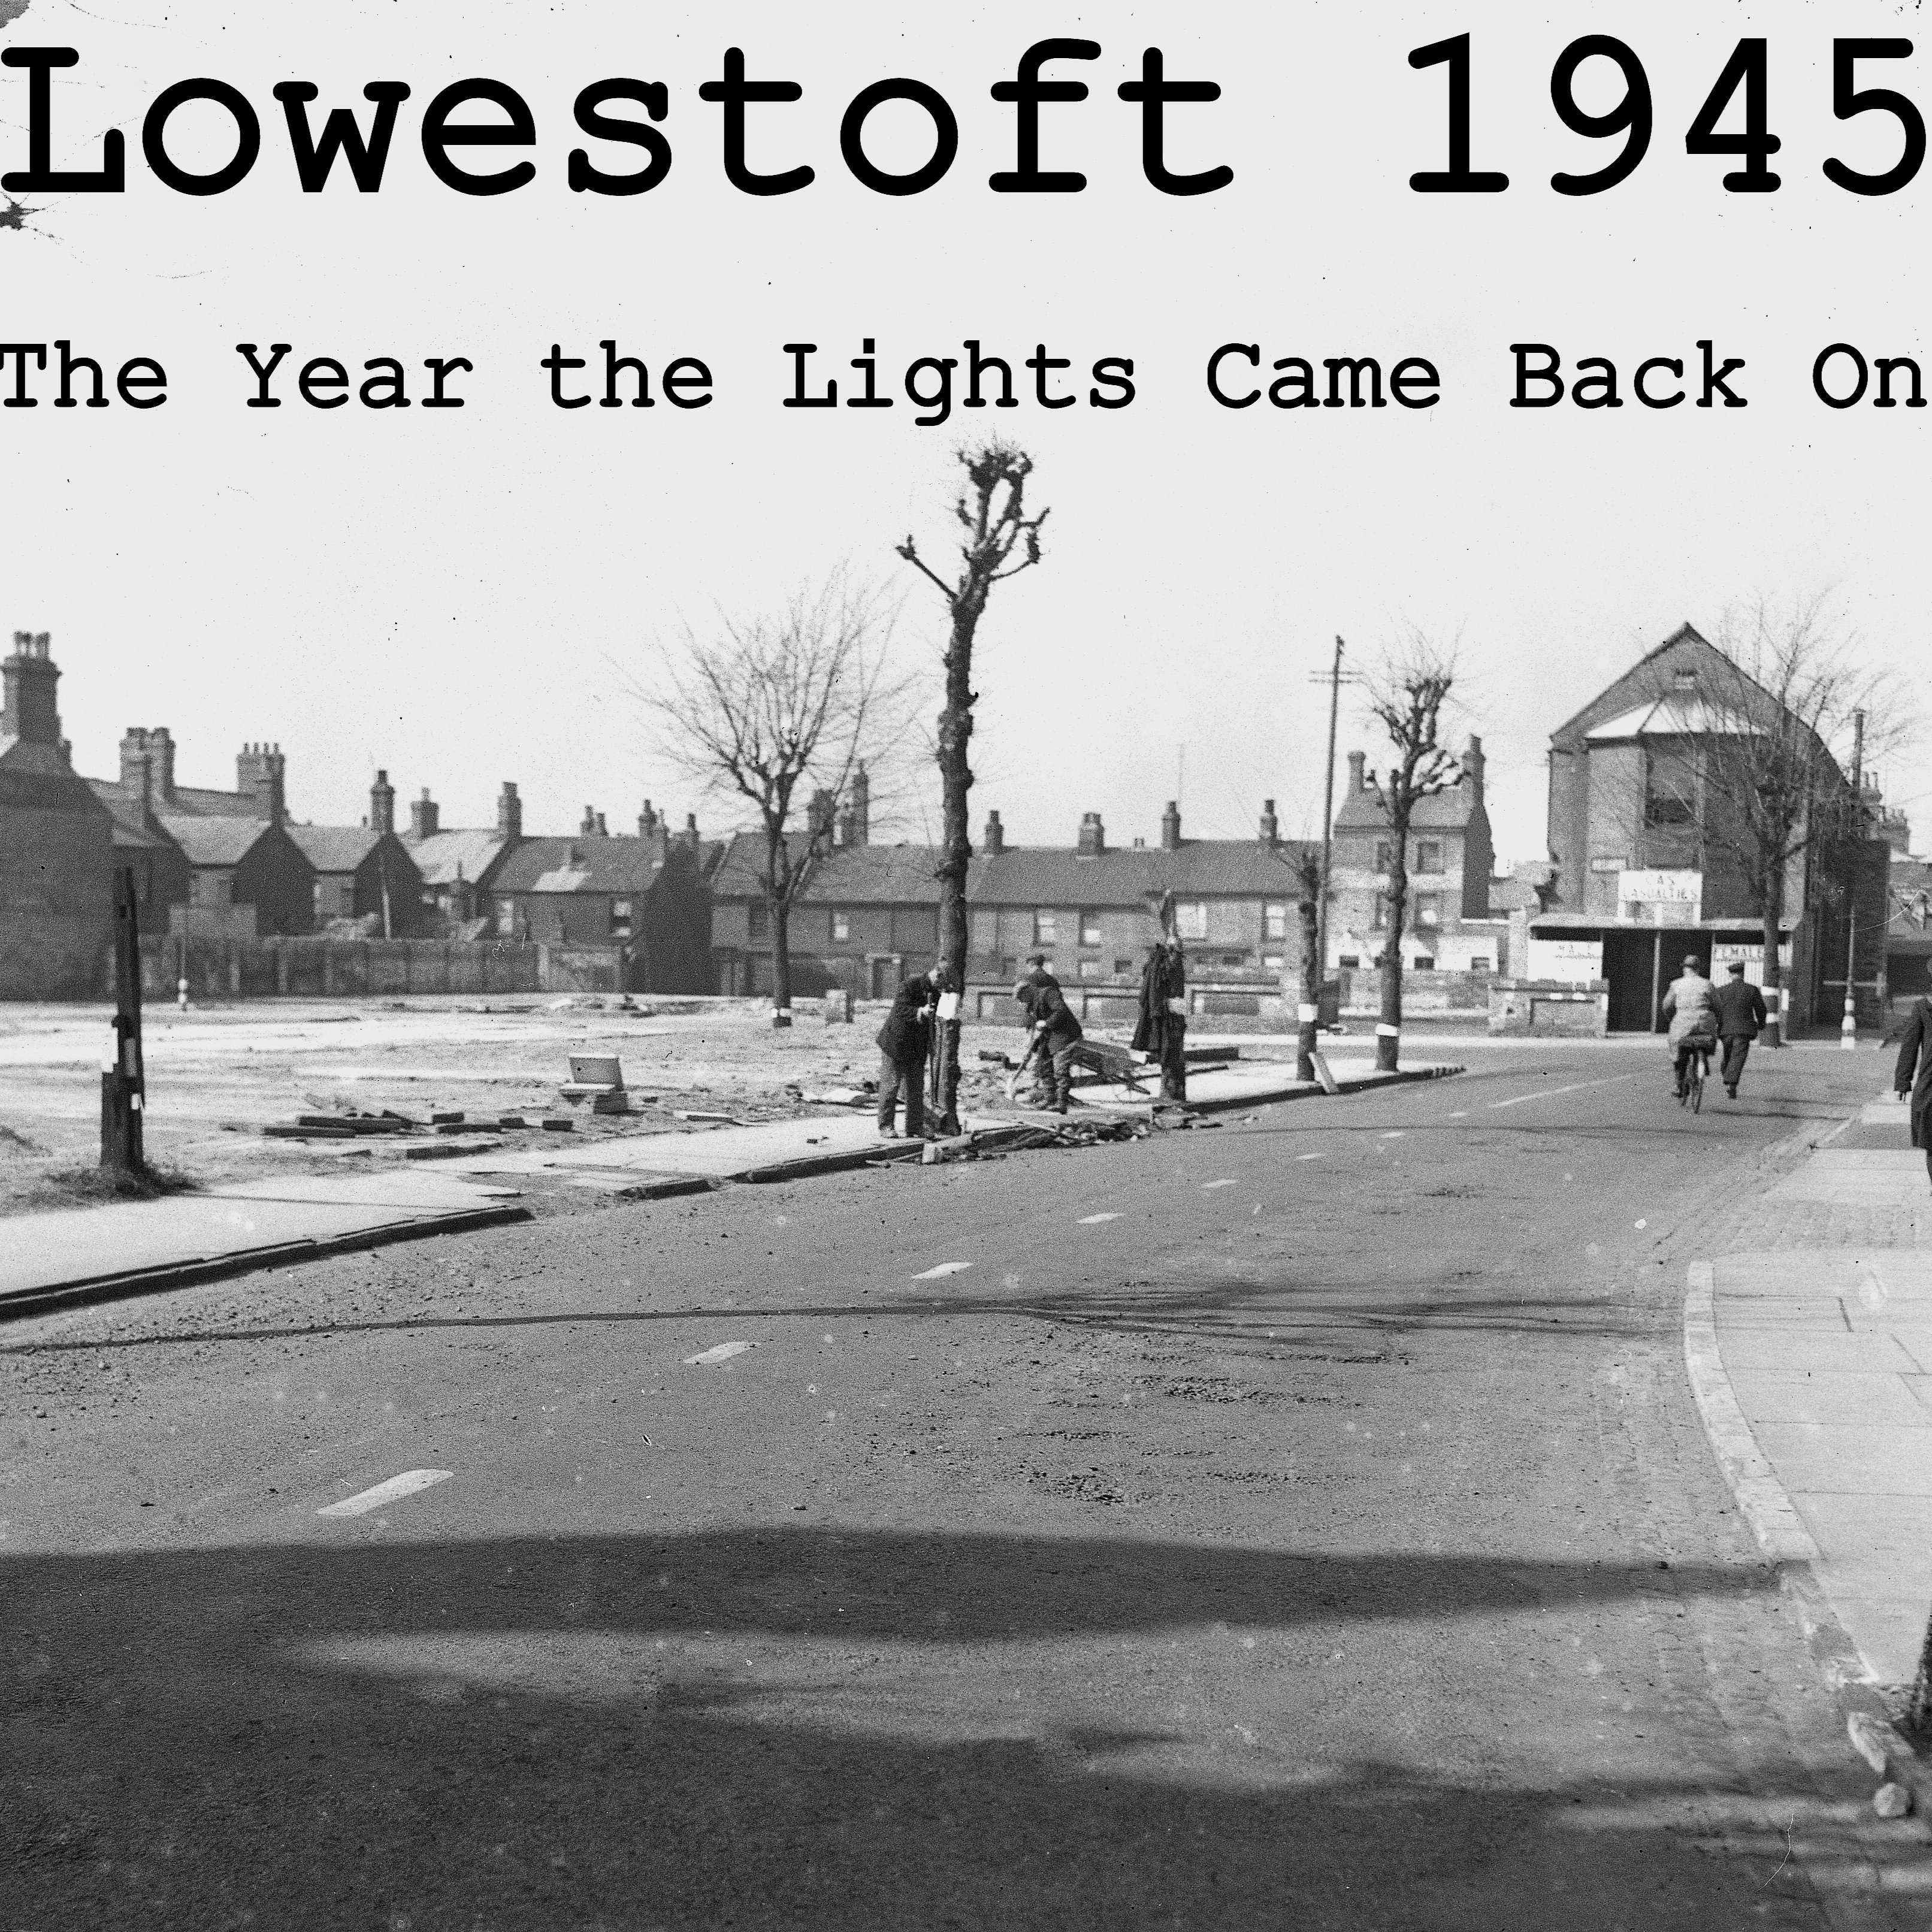 Lowestoft 1945: The Year the Lights Came Back On  Image